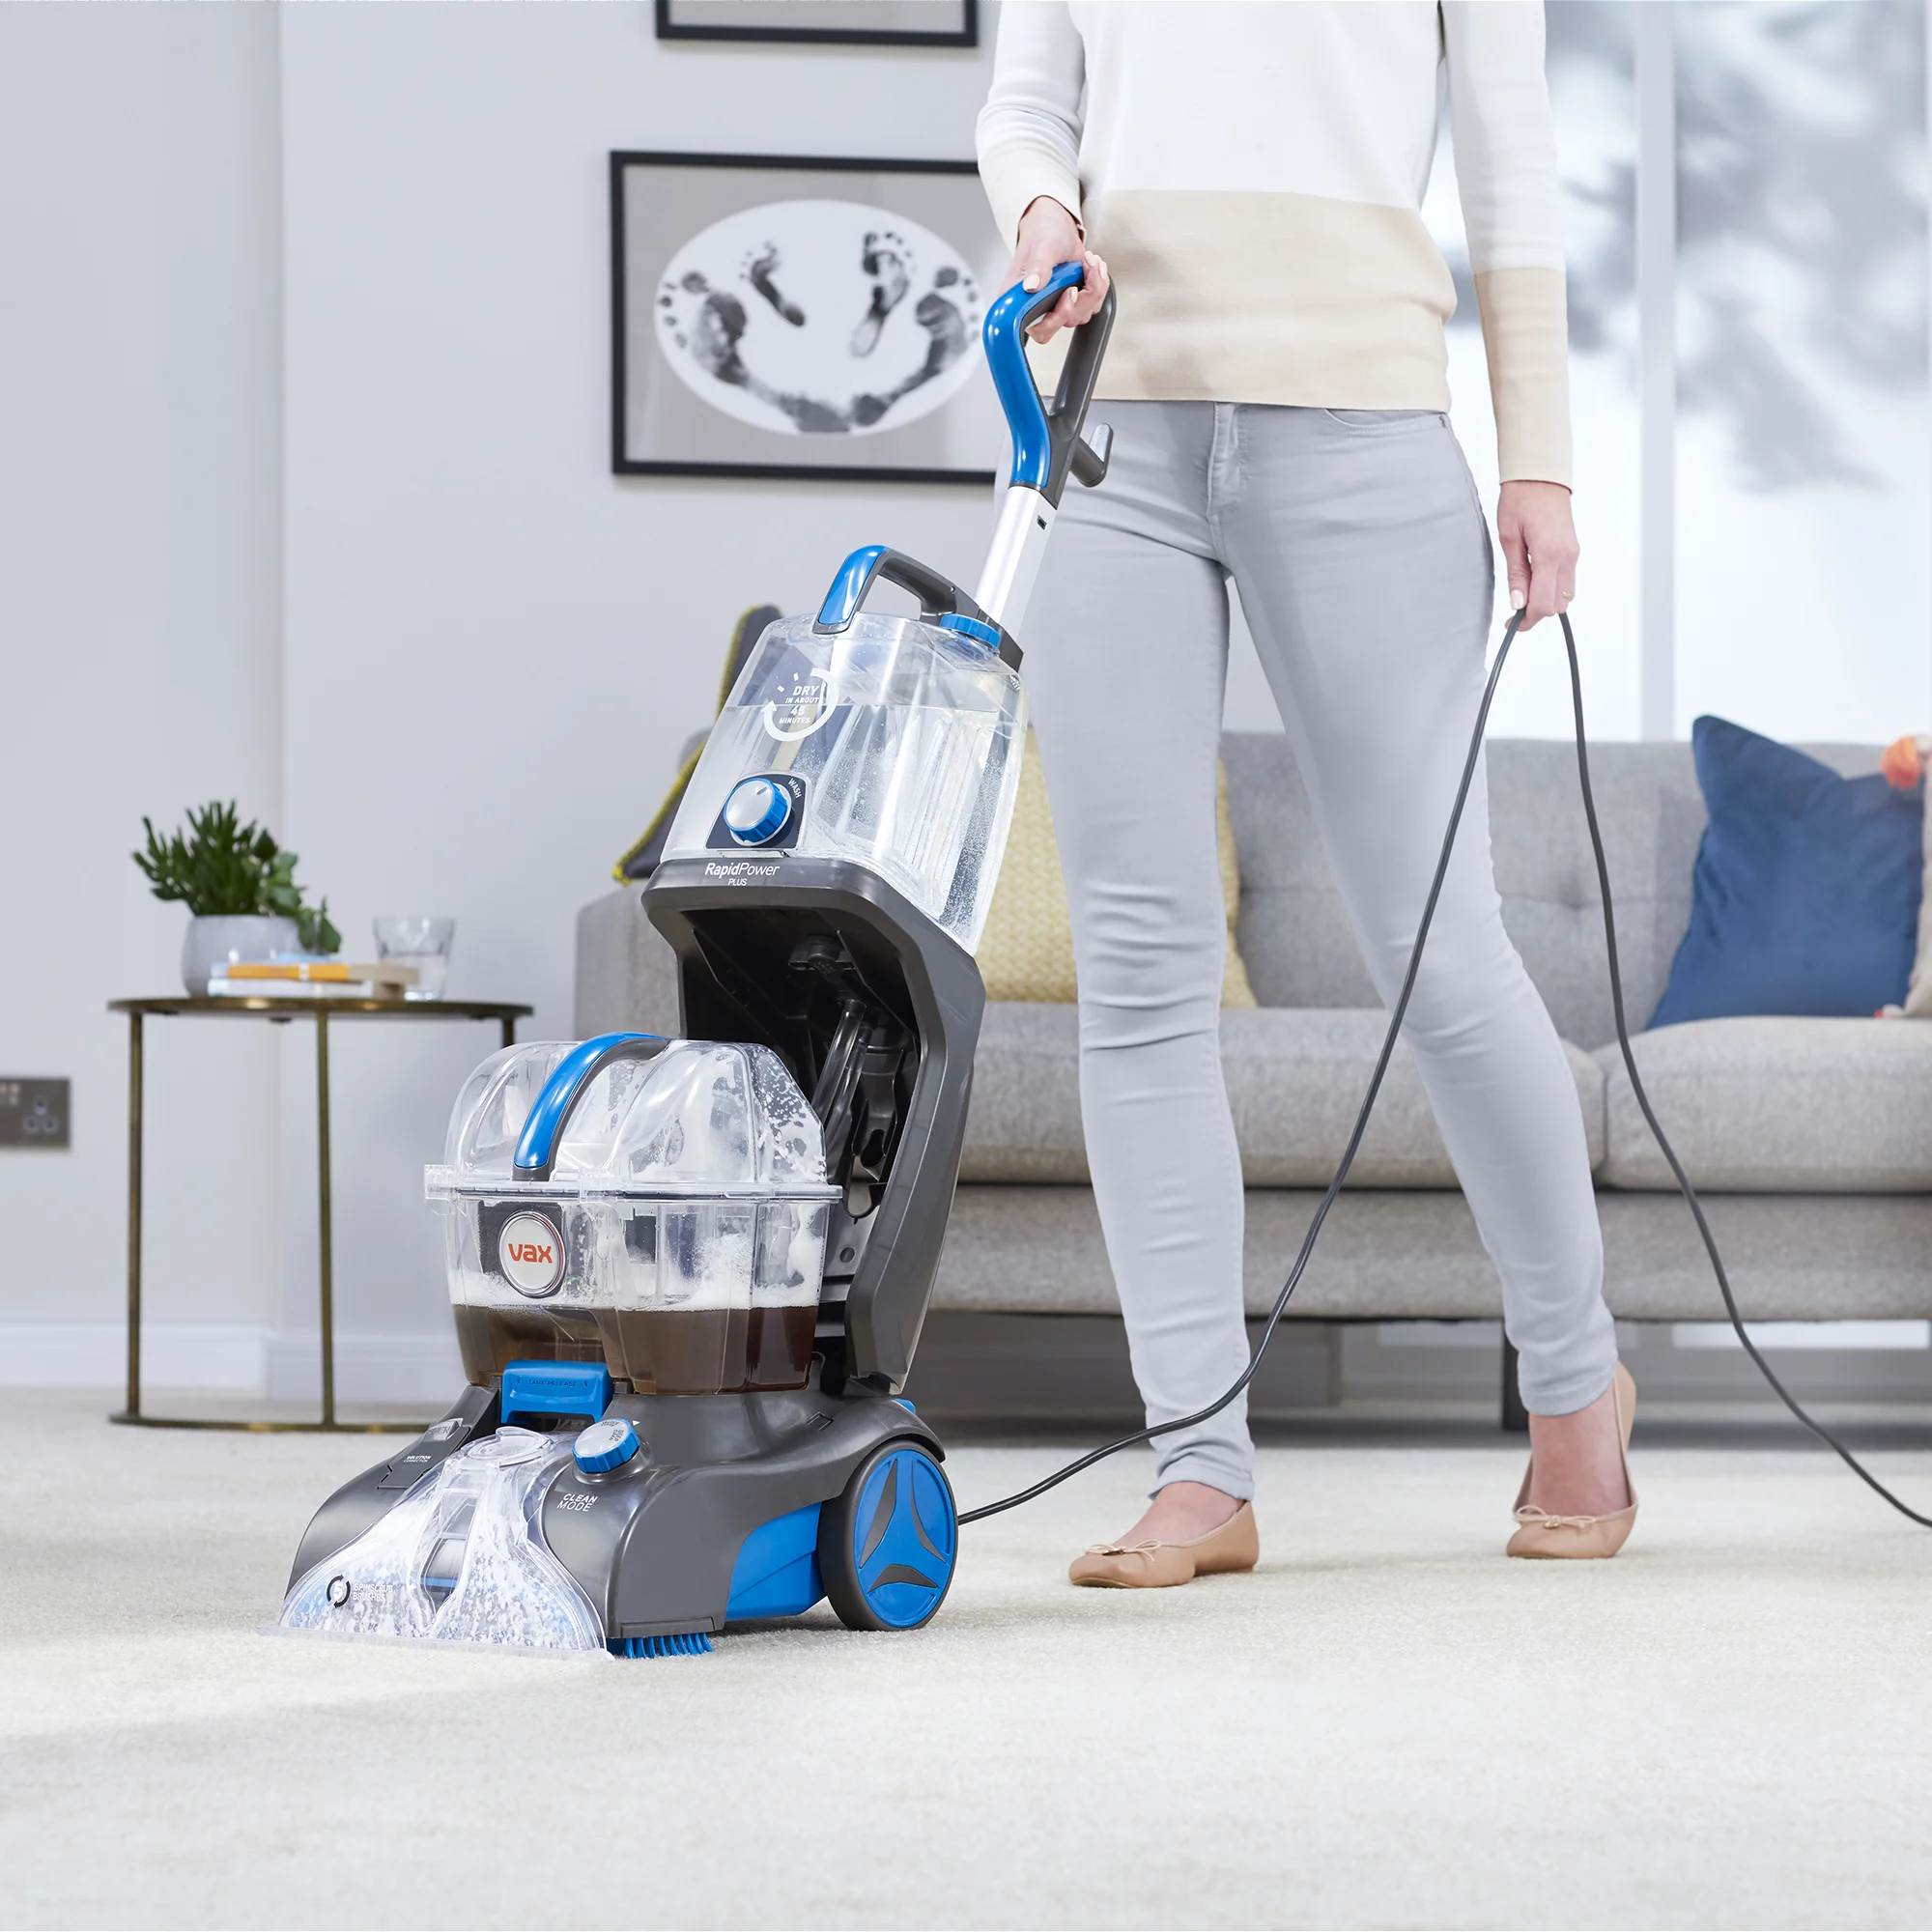 Can You Use a Carpet Cleaner on Tile Floors